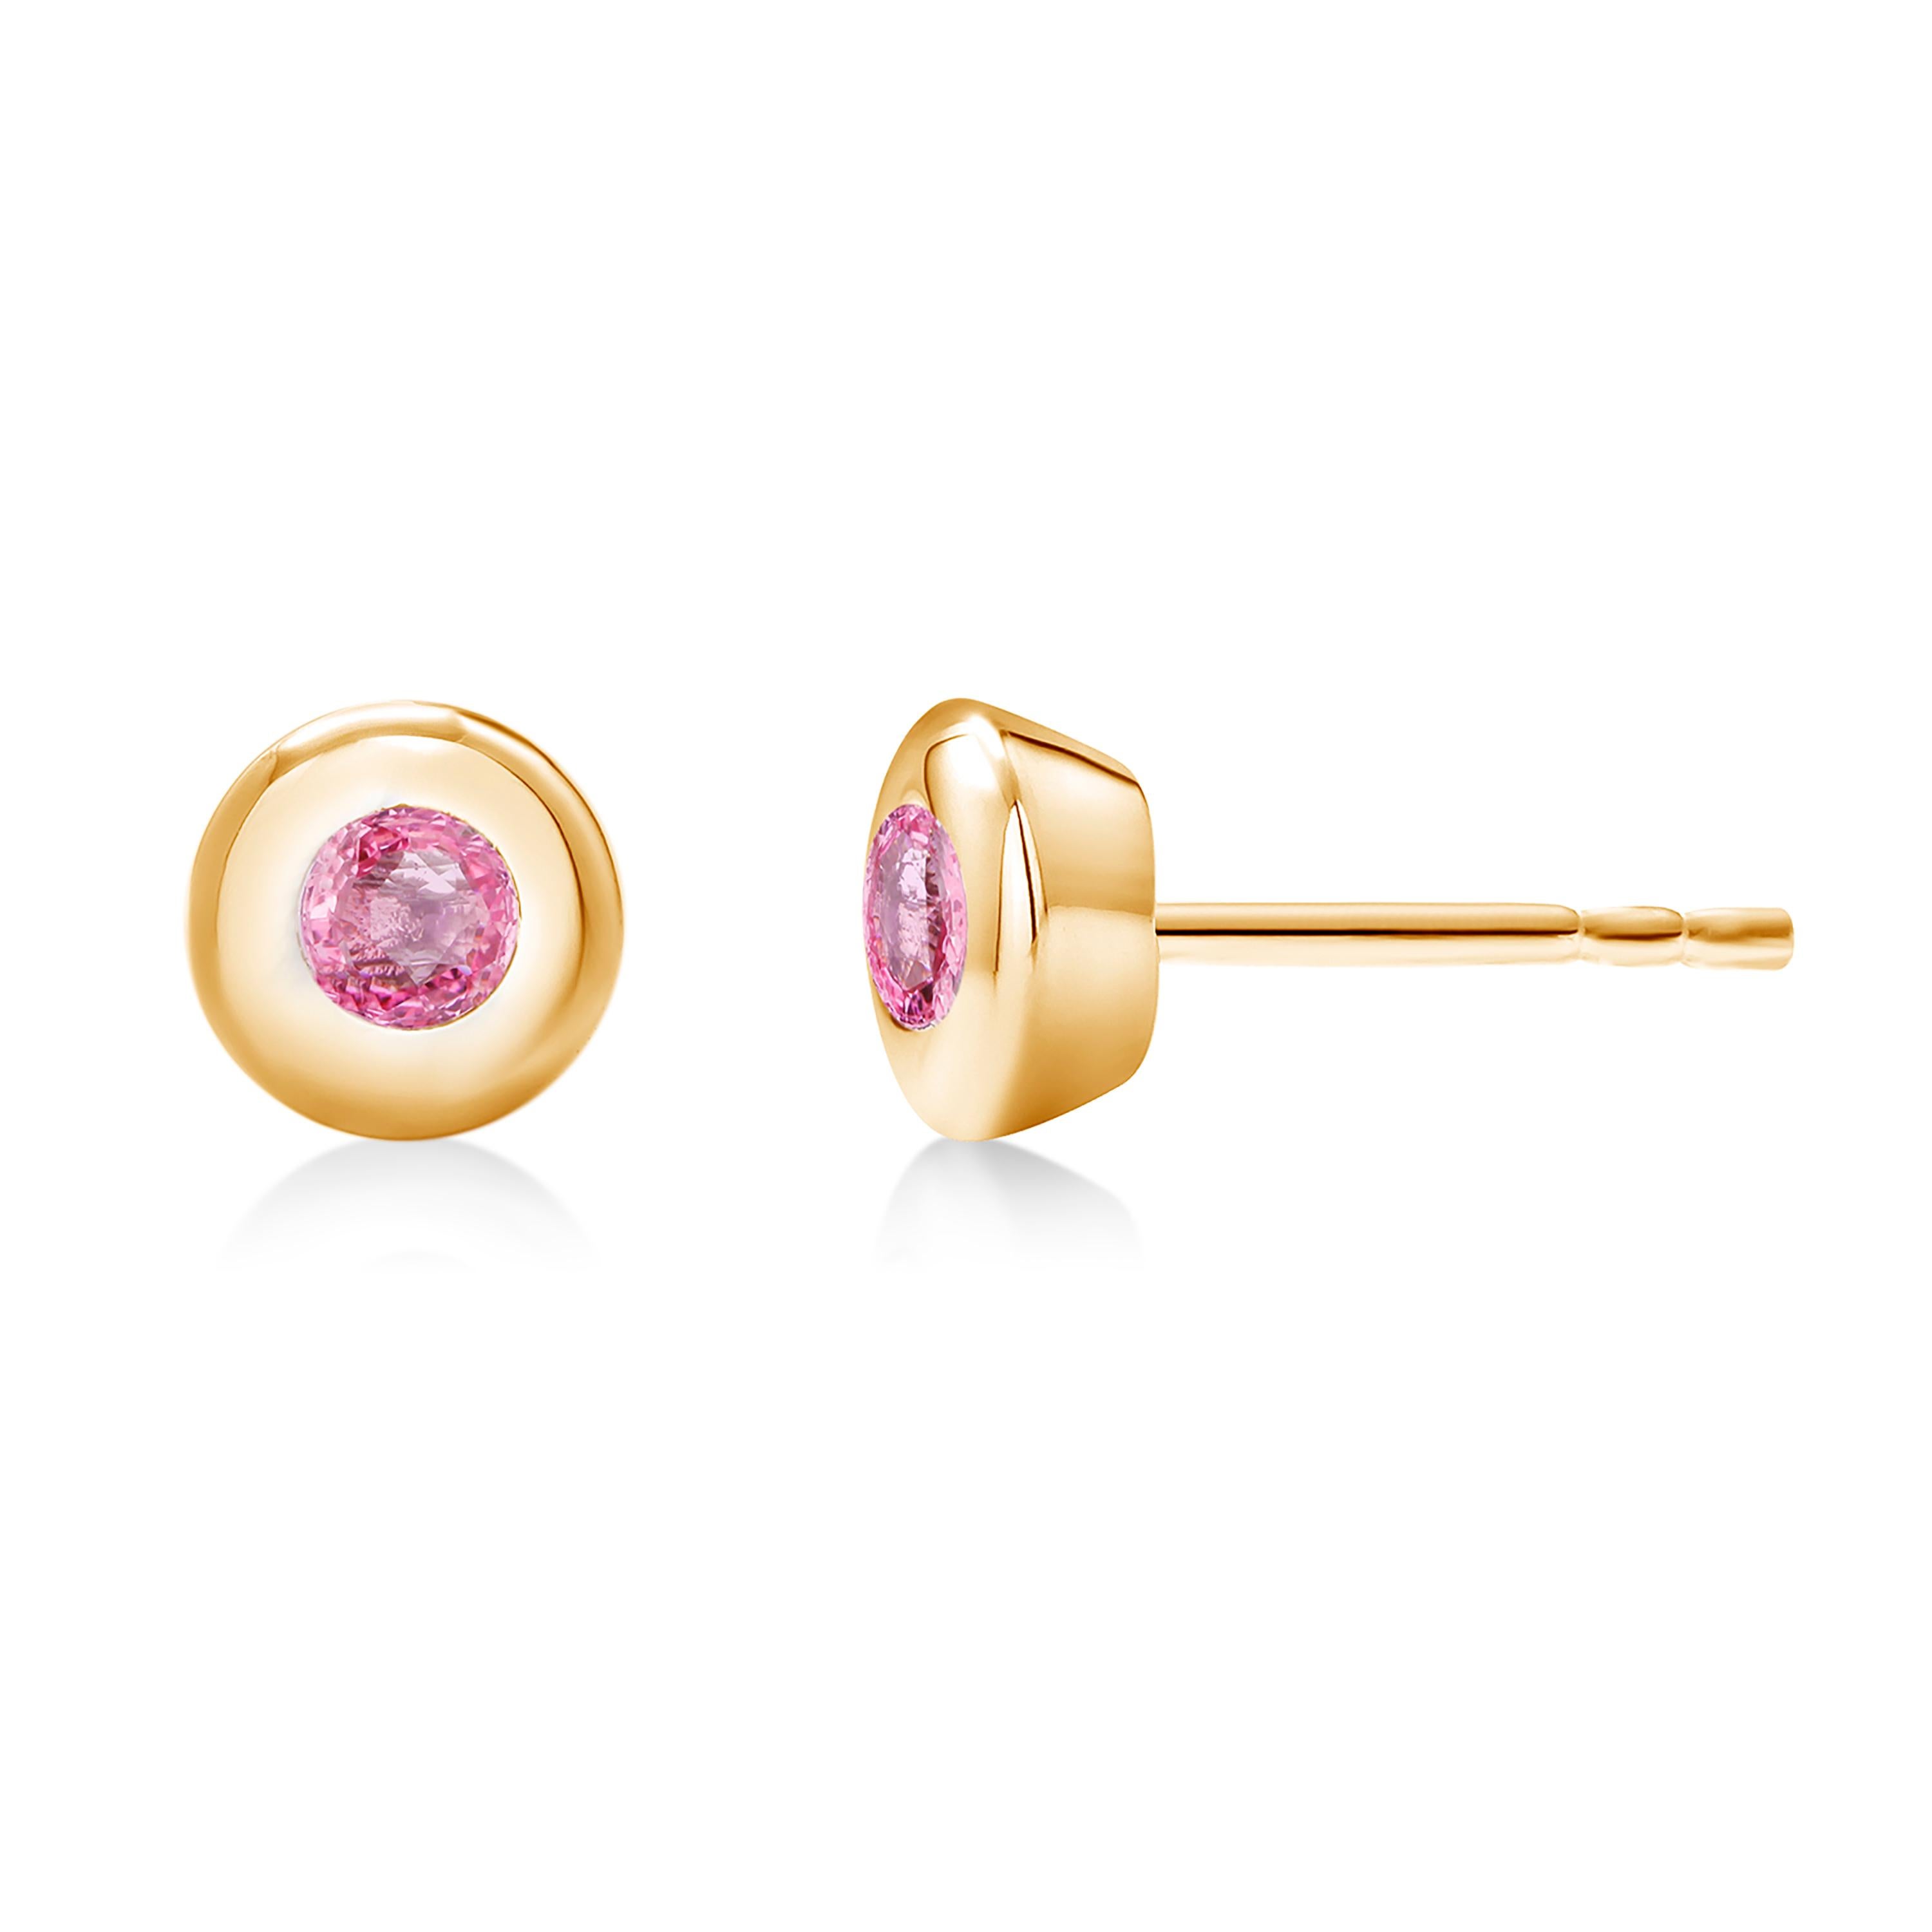 14 karat yellow gold round pink sapphire stud earrings
Two round pink sapphires measuring 3 millimeters each 
PinK sapphire hue tone color is bubblegum pink
Pink sapphires weighing 0.30   
New Earrings
New Earrings
Handmade in the USA
The 14 karat